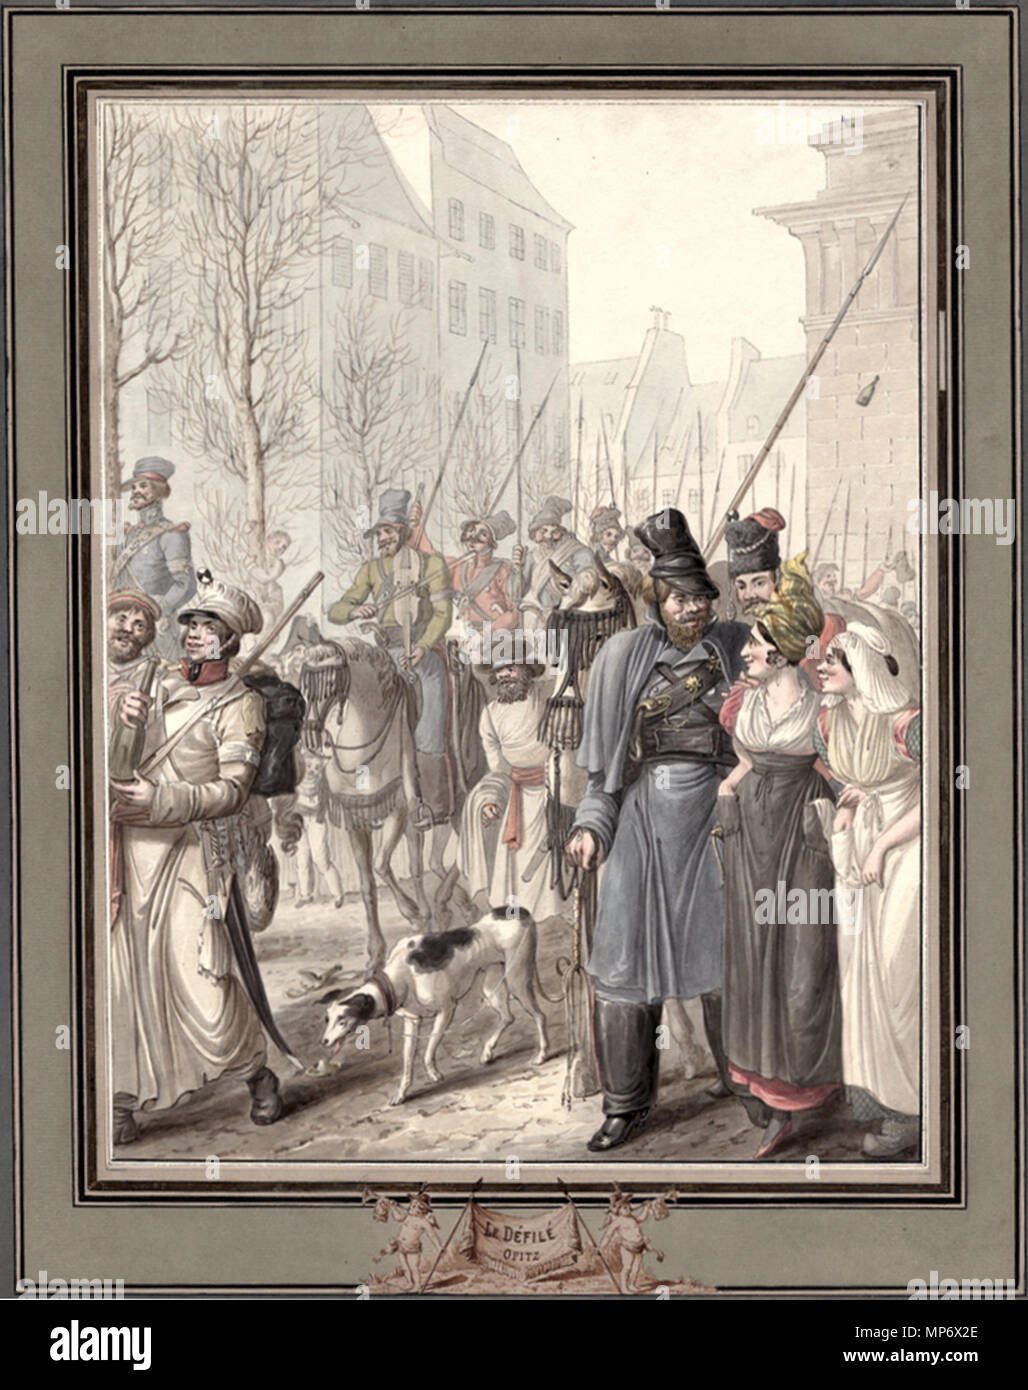 Français : Le Défilé militaire .  English: This is the first of a pair of unsigned watercolors by the German artist Georg Emanuel Opitz (1775-1841). It shows a procession of cossack soldiers marching through Paris during the occupation of the city in 1814. Opitz, who focused on portraiture and caricature, traveled to Paris in 1813 and witnessed the arrival of Russian and Prussian forces in the city following the Battle of Paris. Until this battle, no foreign army had entered Paris in 400 years. The French defeat led to the abdication of the Emperor Napoleon. The watercolor is from the Anne S.K Stock Photo